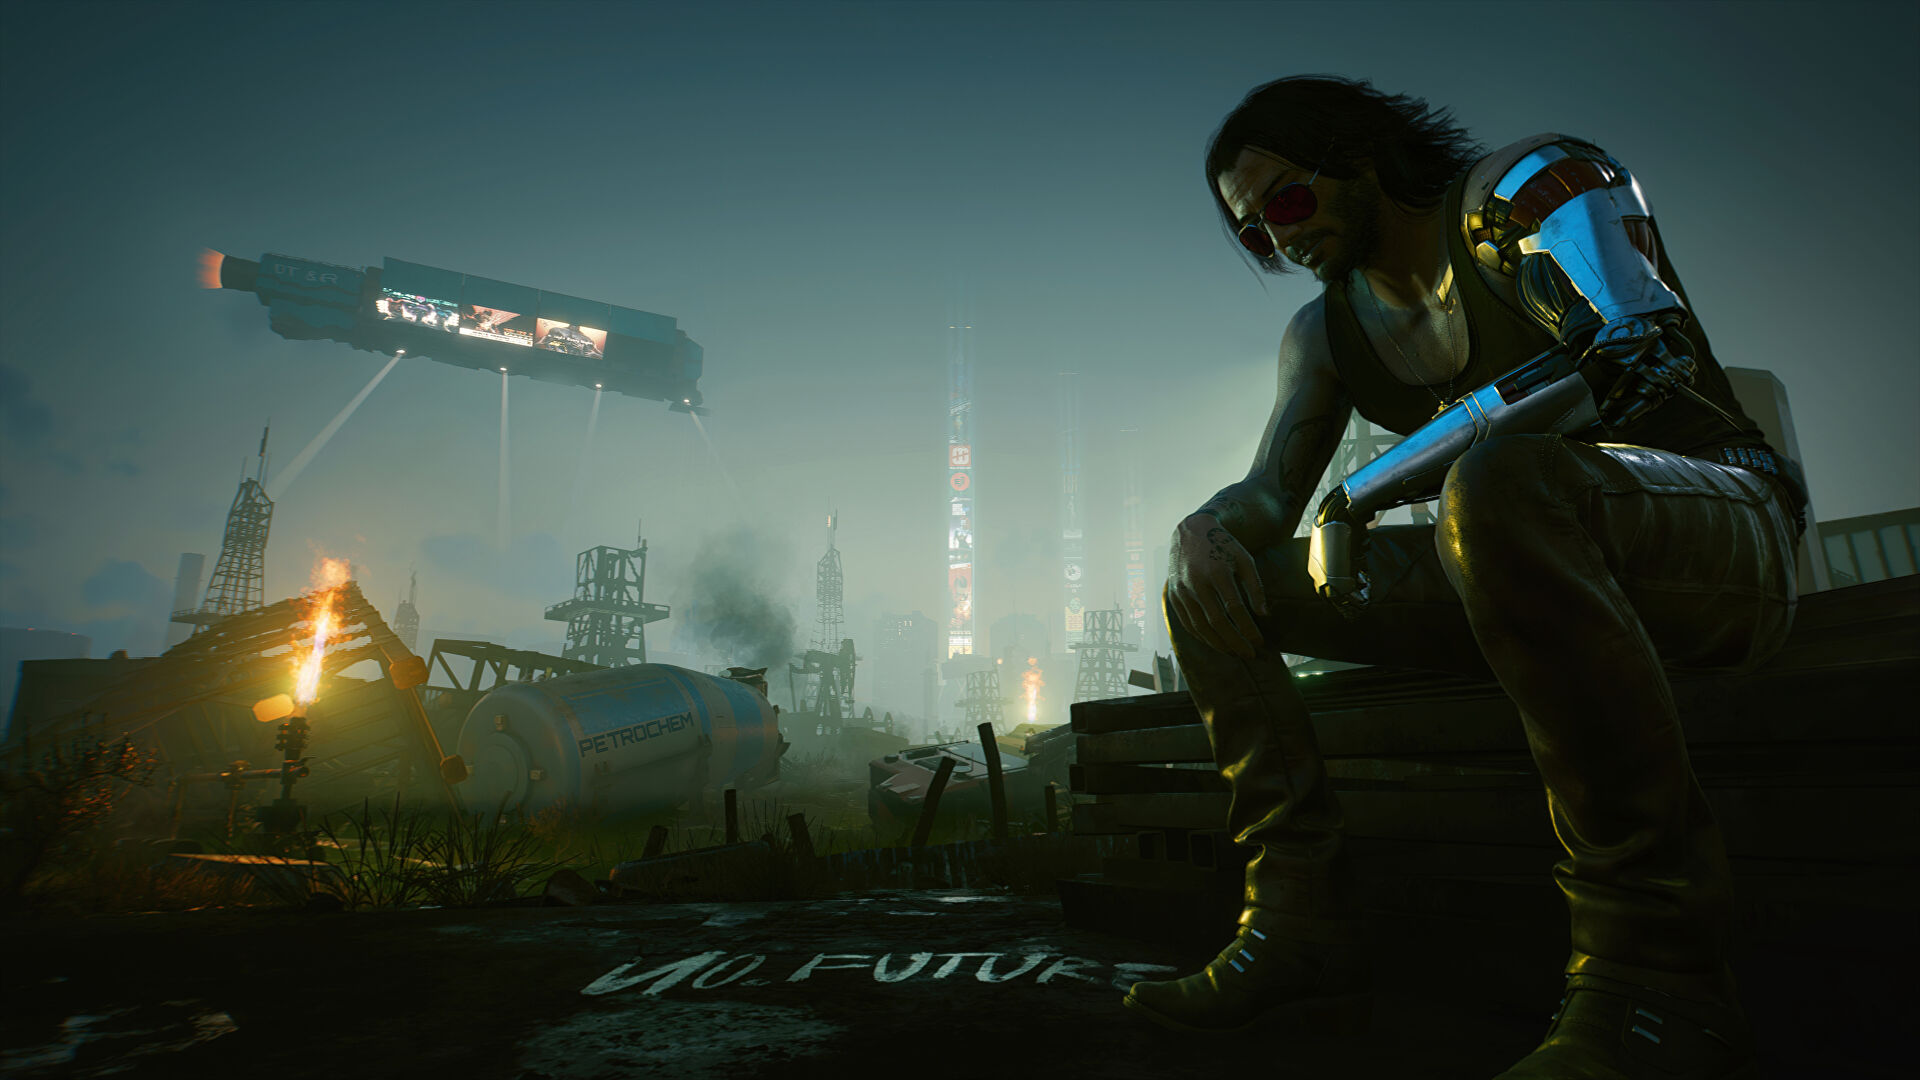 Cyberpunk 2077’s player count is thriving through the power of anime